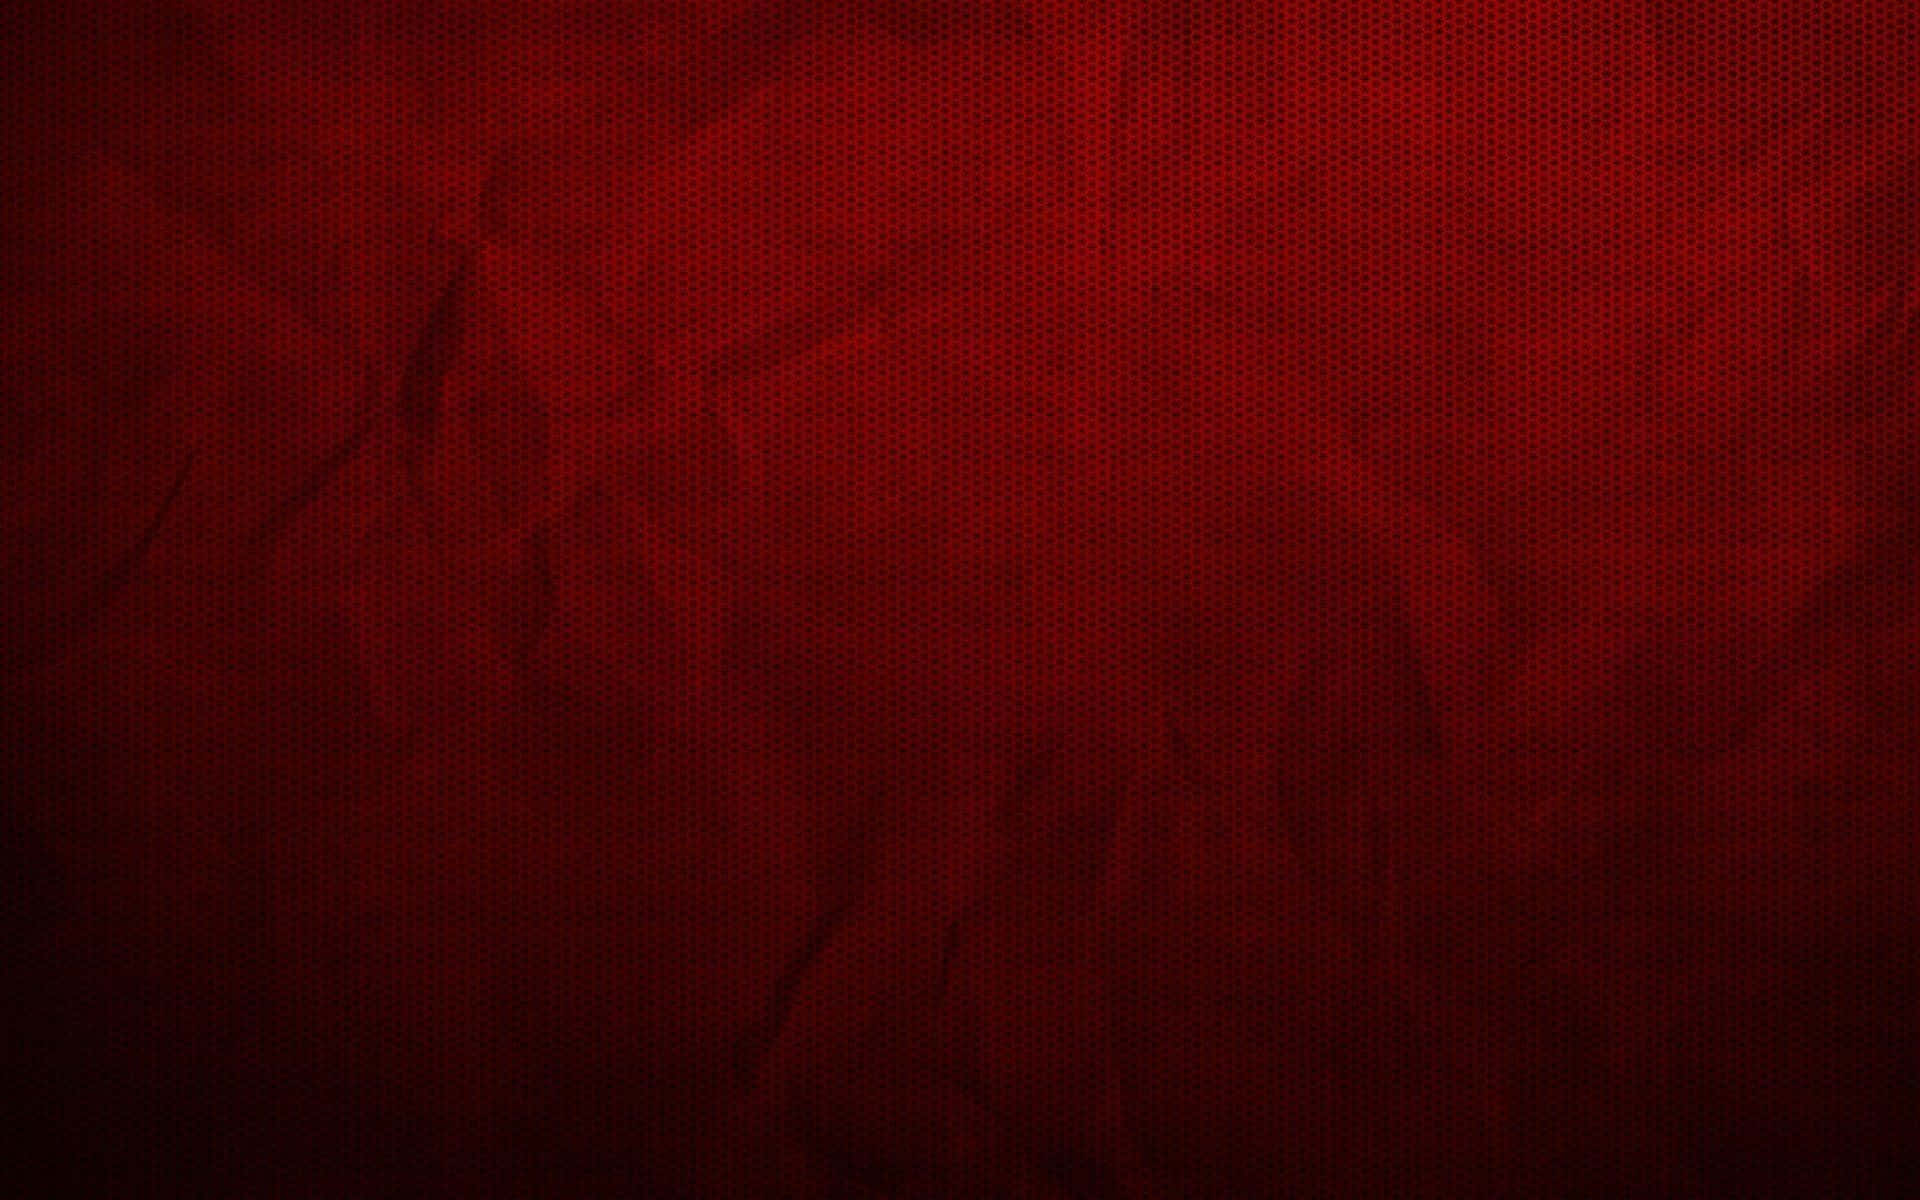 Maroon With Smoke Effect Wallpaper